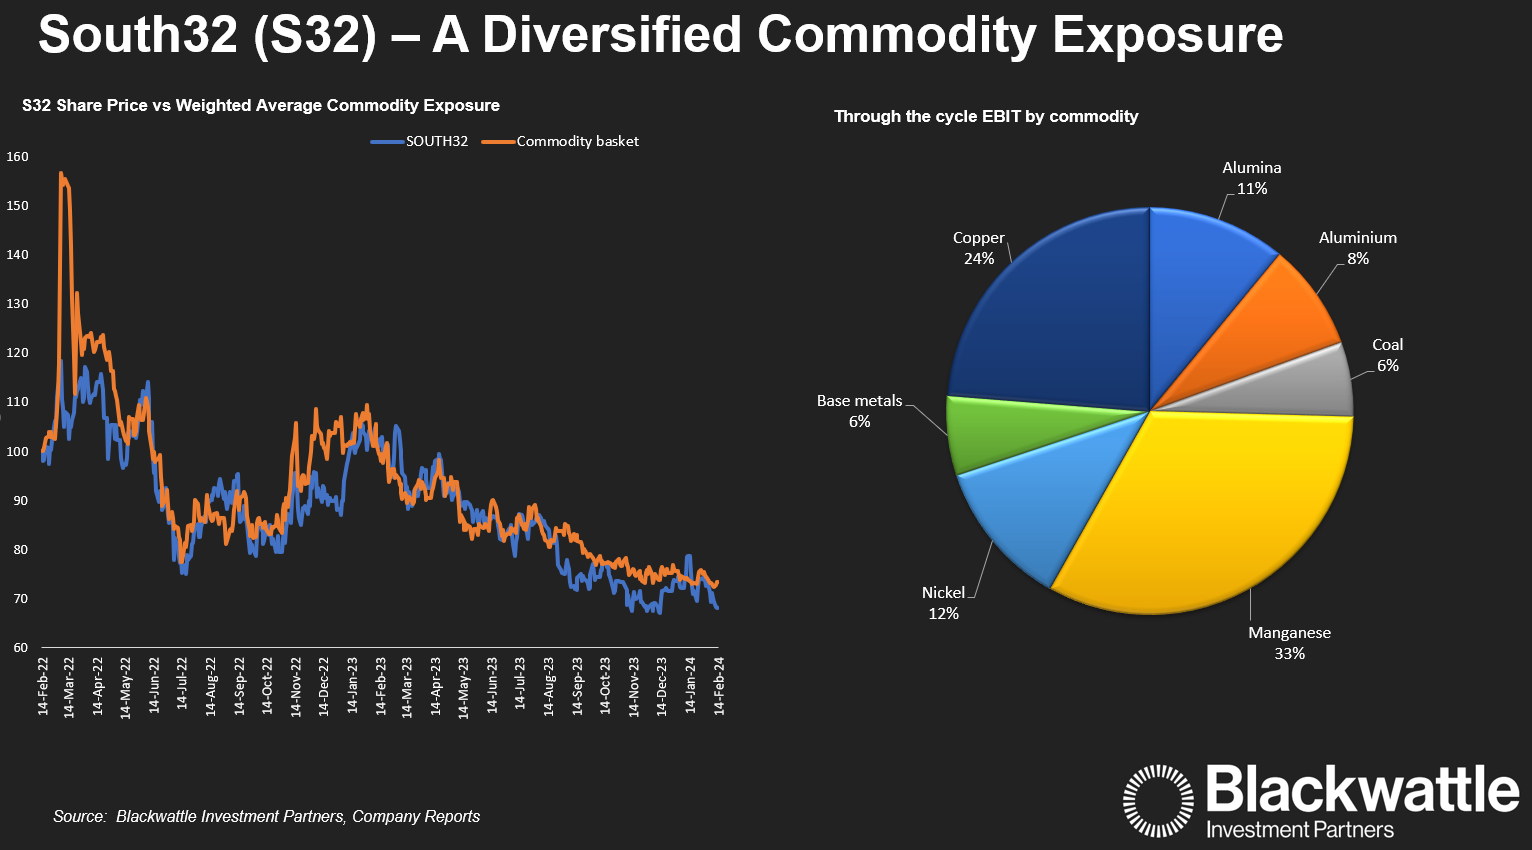 Image: South32 share price versus Weighted Average Commodity Exposure (Source: Blackwattle)